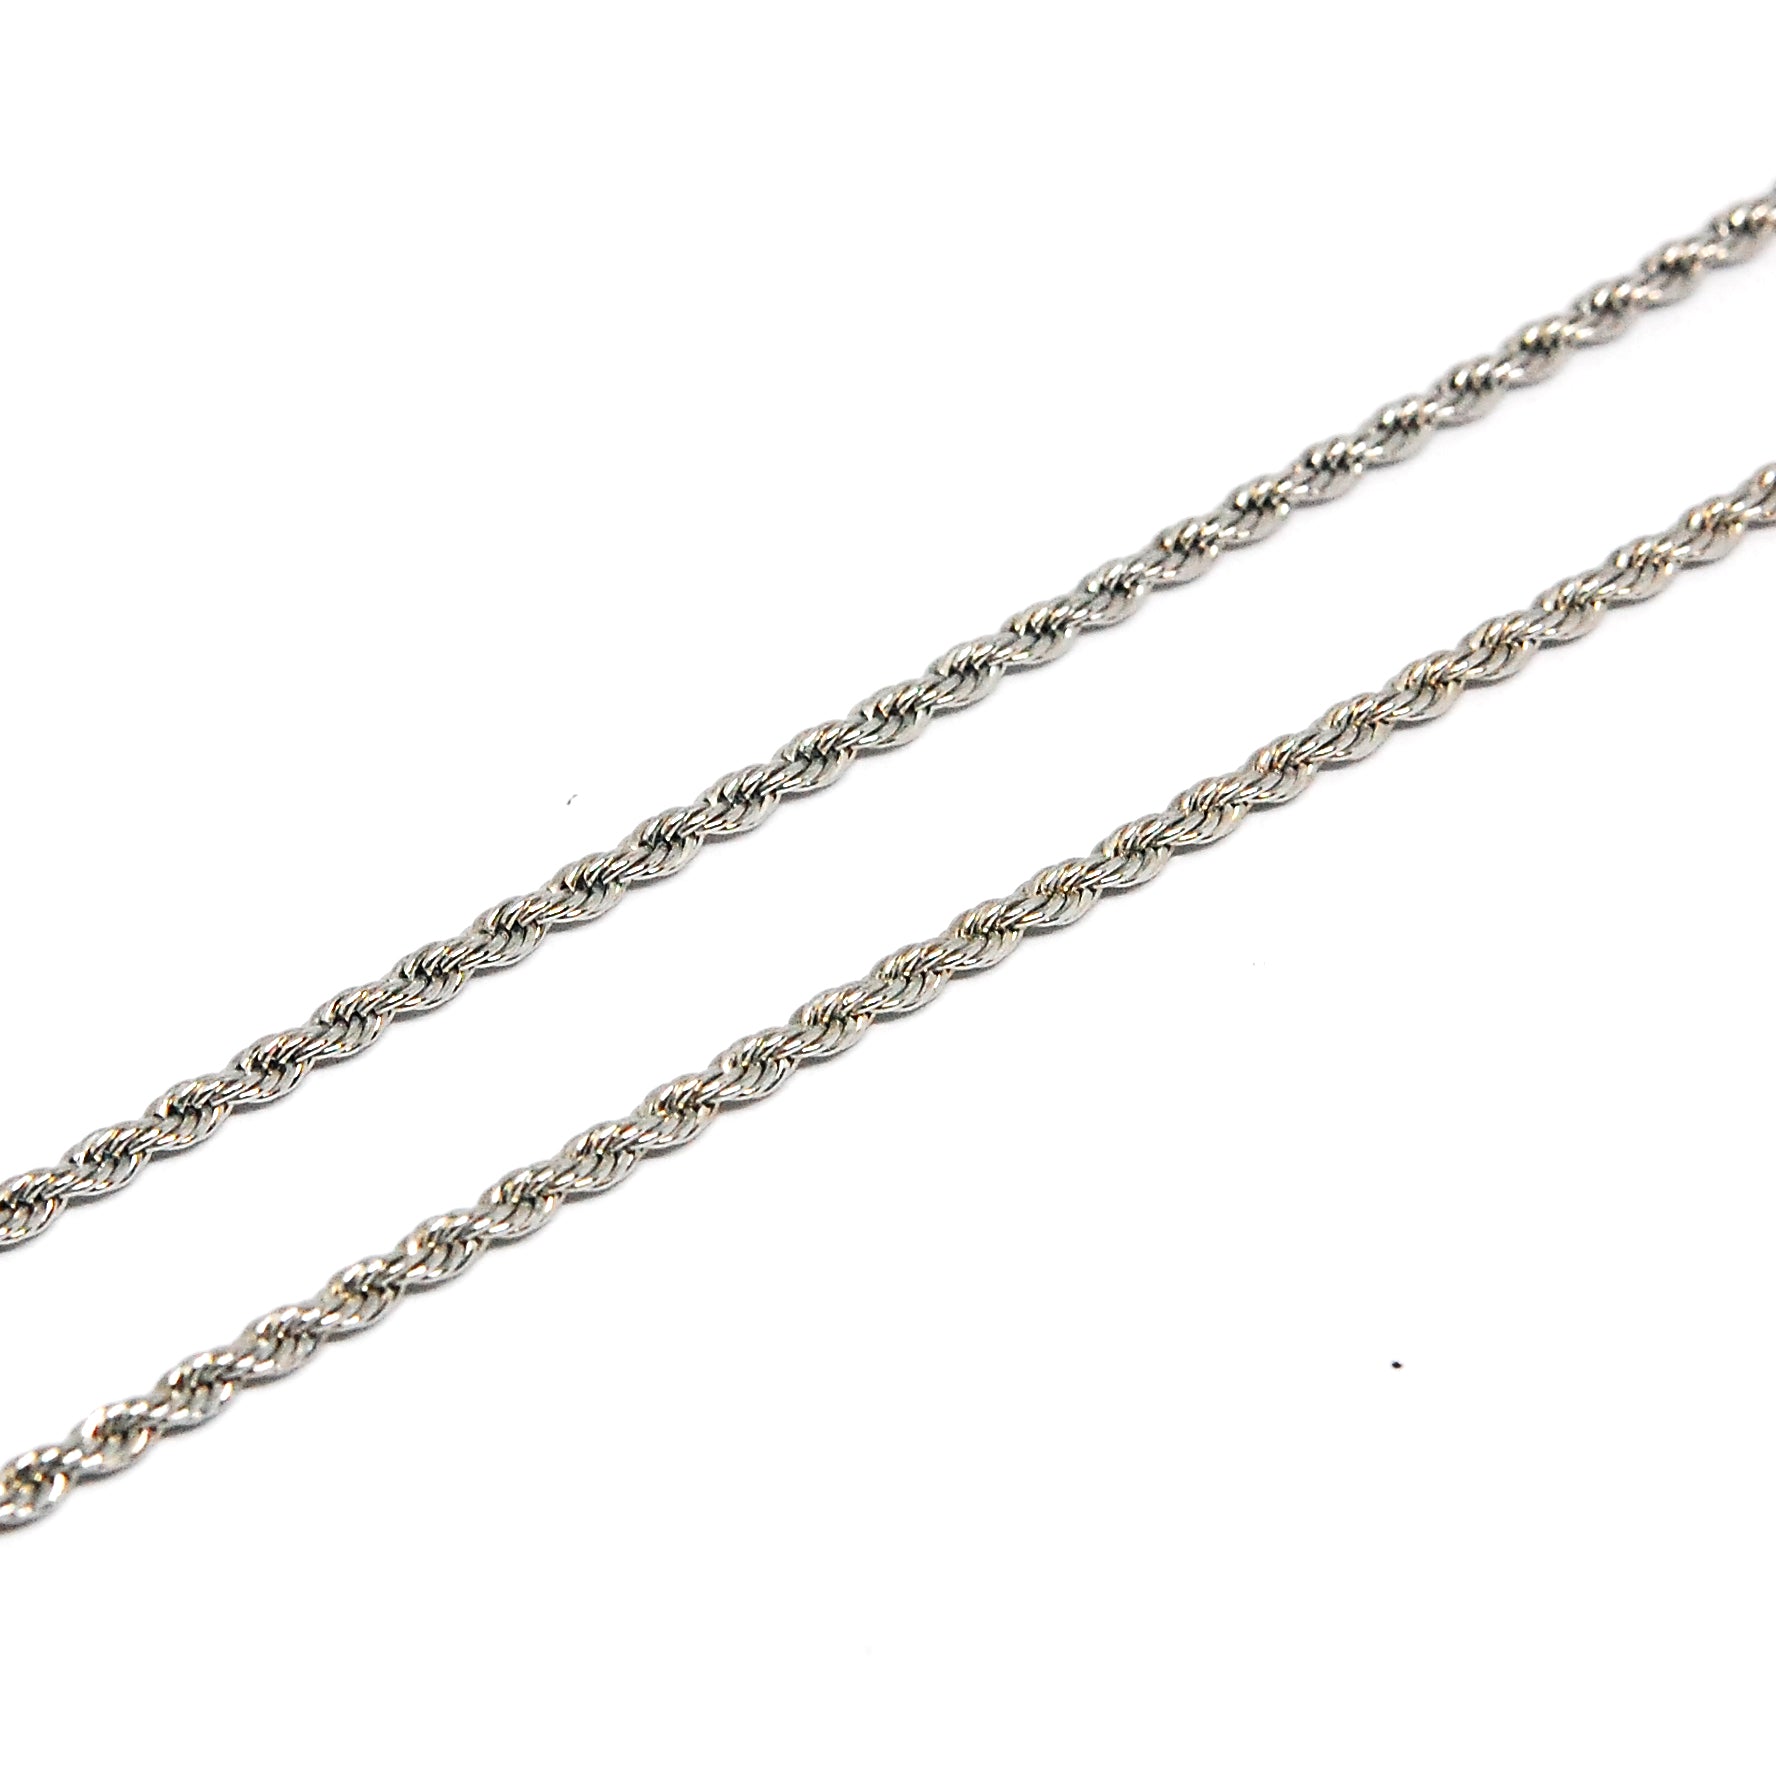 ESCH 7830: 17" S/S Twisted Rope Chain (2mm)